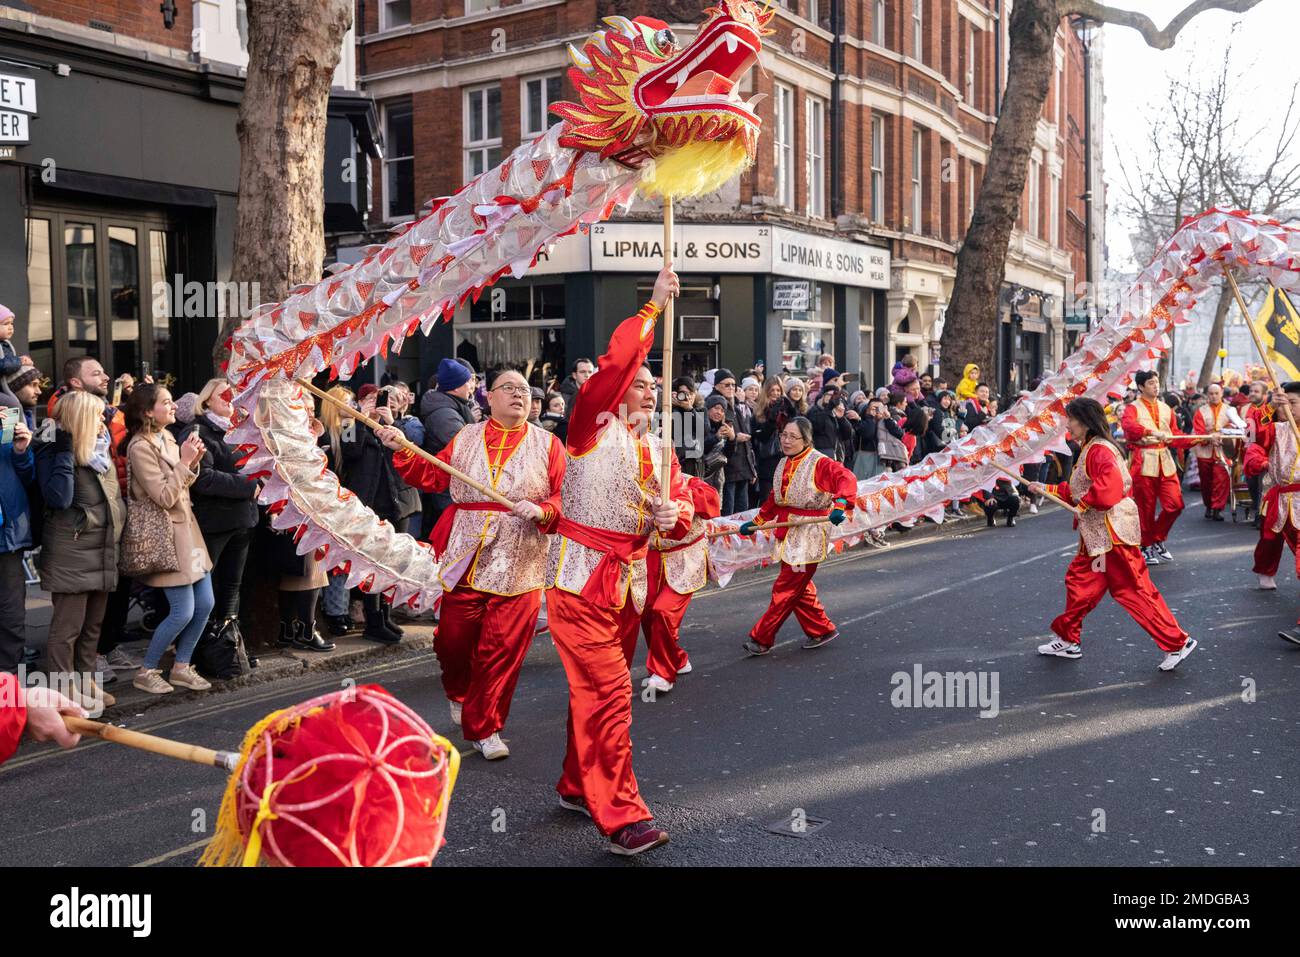 Chinese New Year celebrations make their way through Shaftesbury Avenue along to Trafalgar Square in London's West End for the annual Lunar New Year festival this year celebrating the Year of the Rabbit. Credit: Jeff Gilbert/Alamy Live News Stock Photo